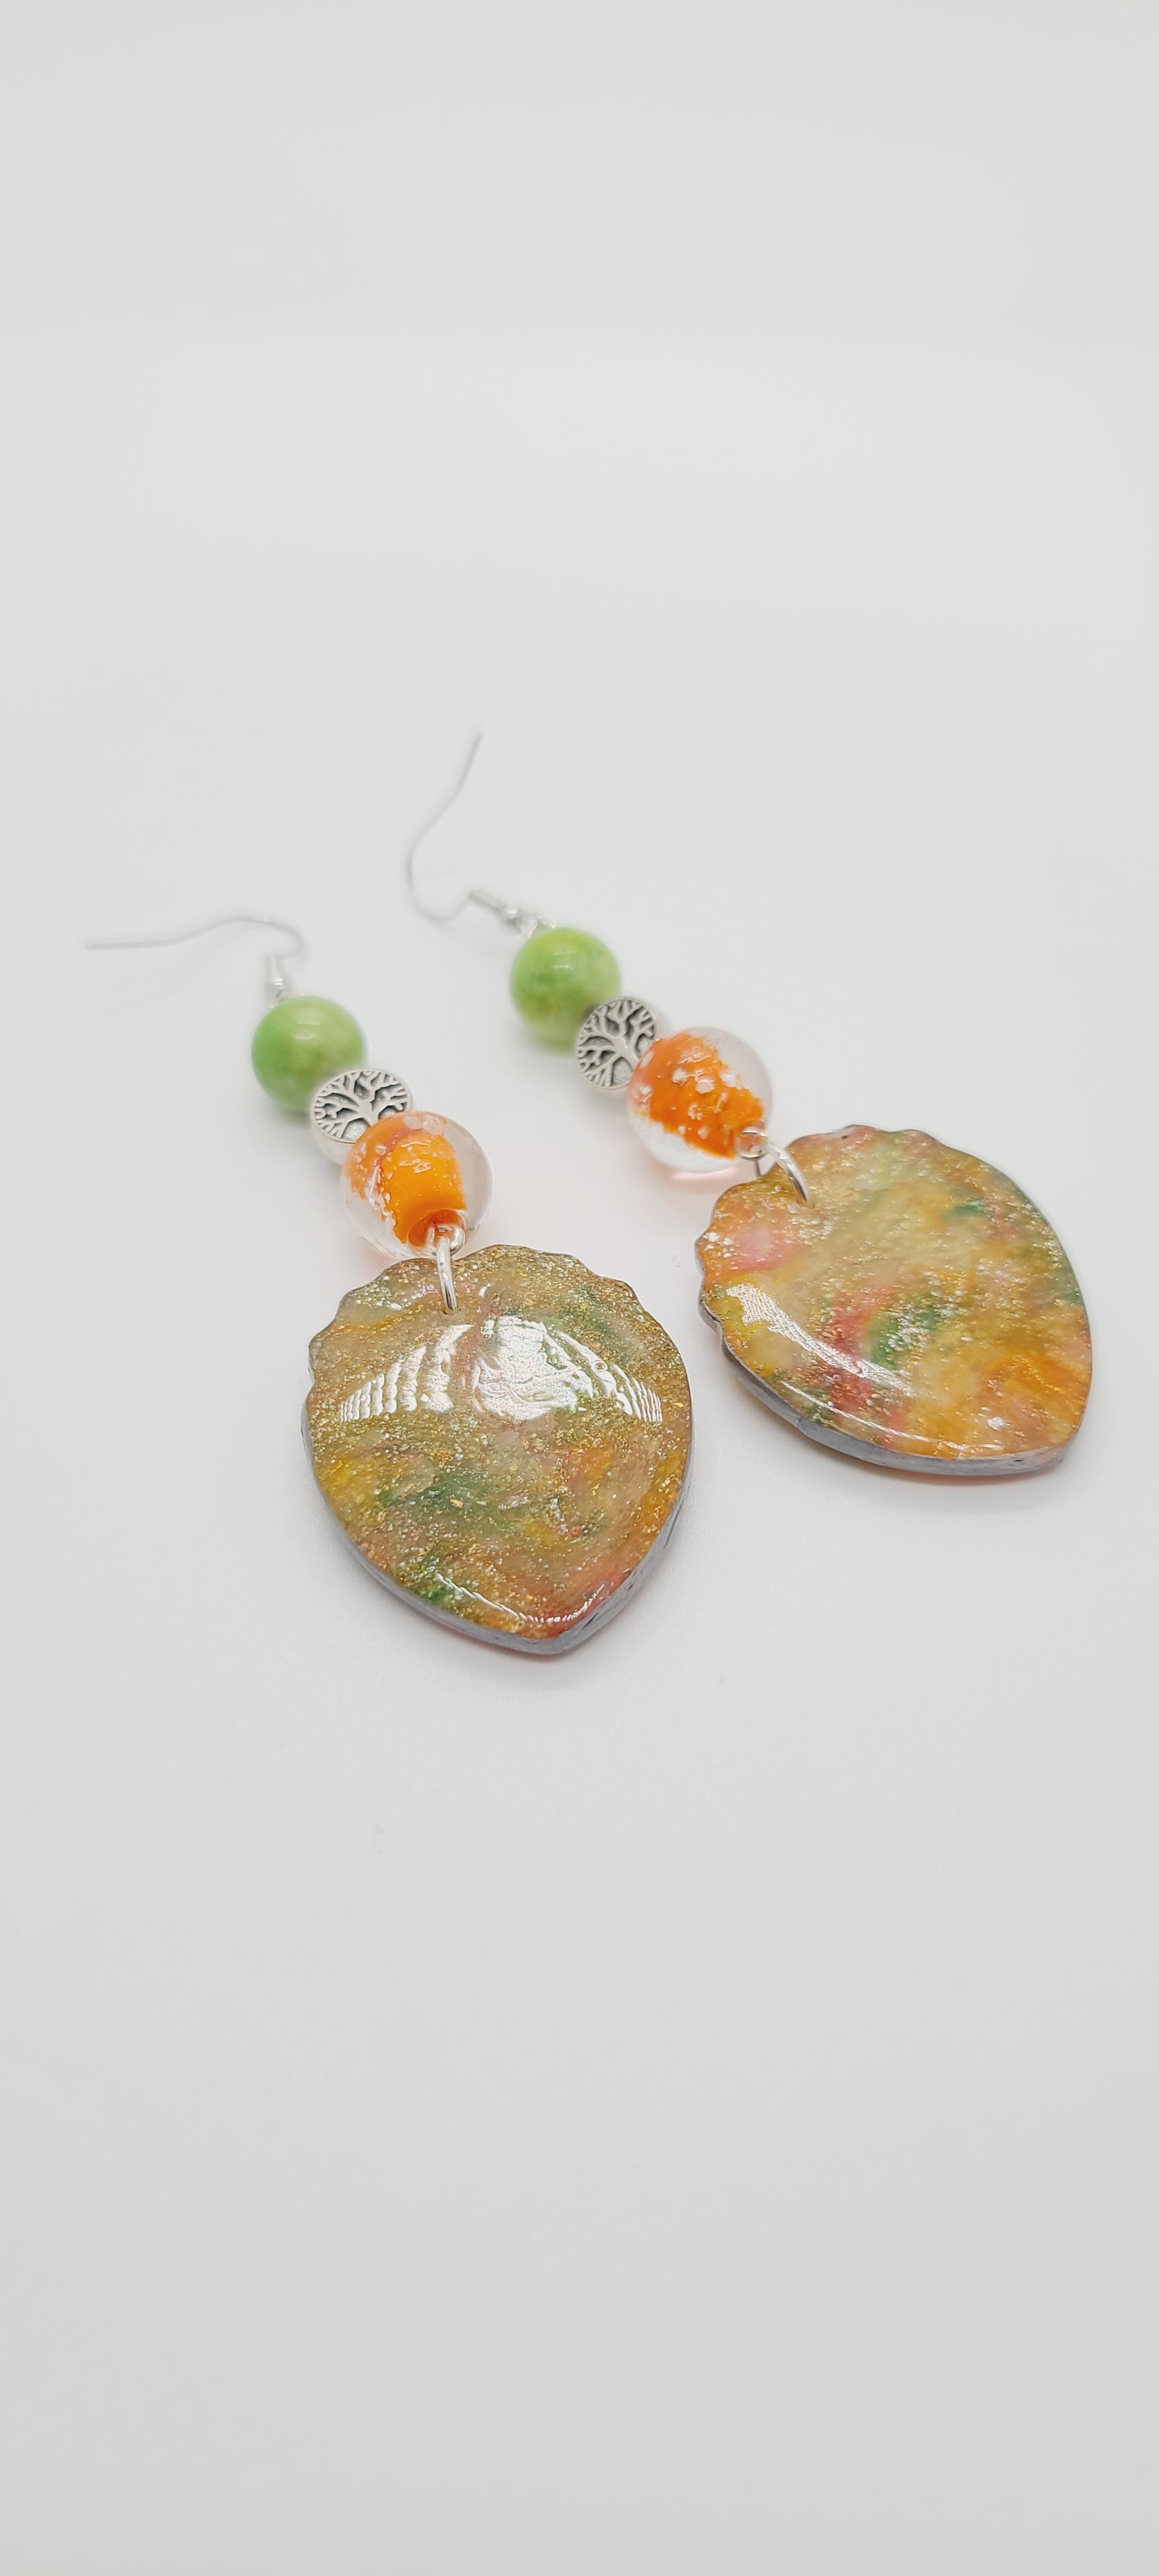 Length: 3.5 inches | Weight: 0.7 ounces  Distinctly You! These earrings are made with teardrop-shaped polymer clay in orange green gold with gold flakes, 12mm clear and orange glass beads, 10mm matte green ceramic beads, and silver tree charm.